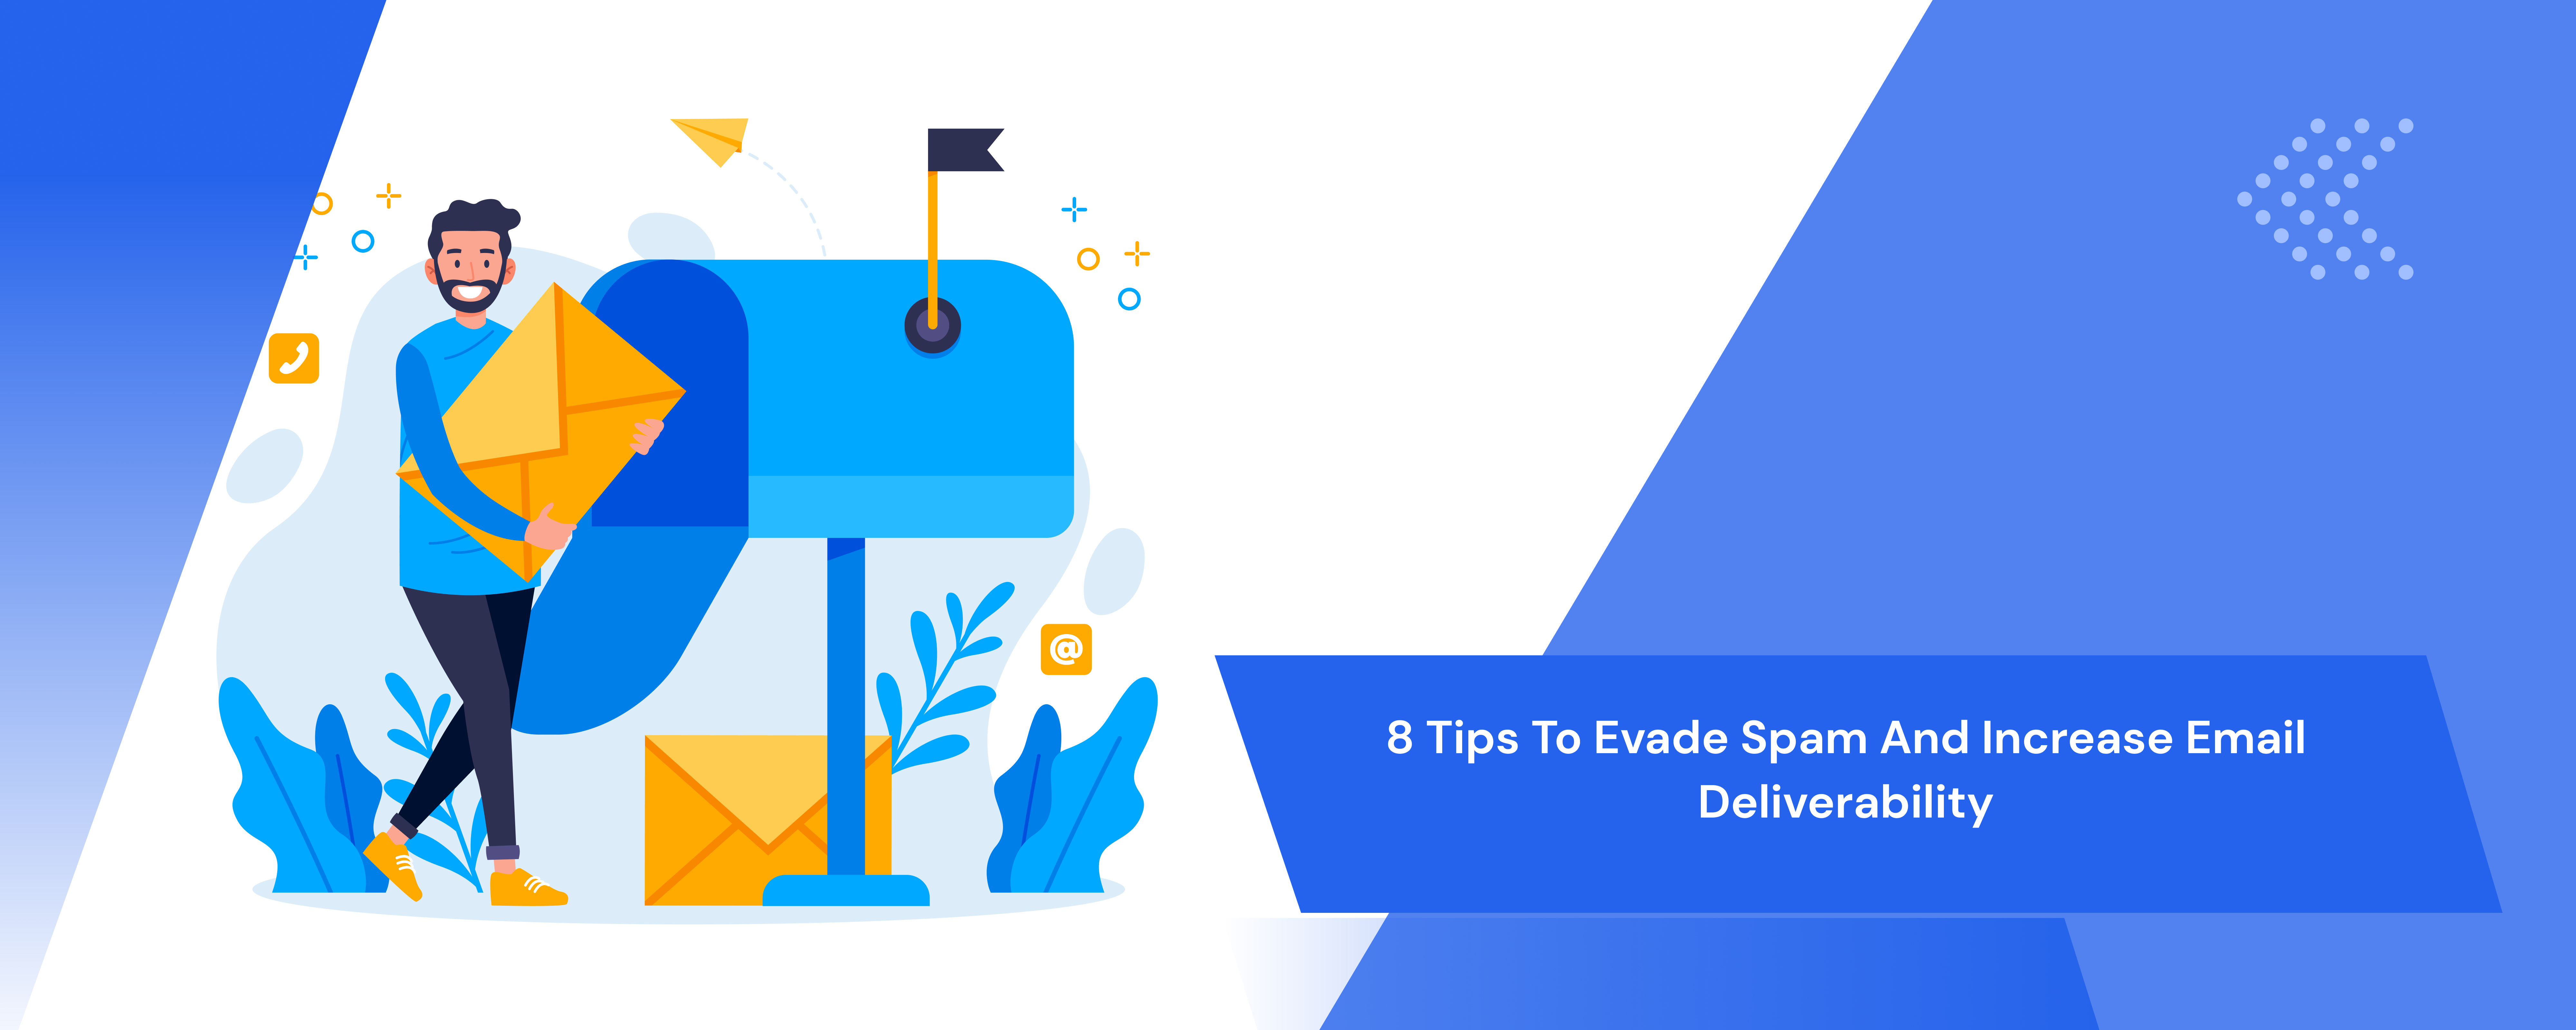 8 Tips to Evade Spam and Increase Email Deliverability